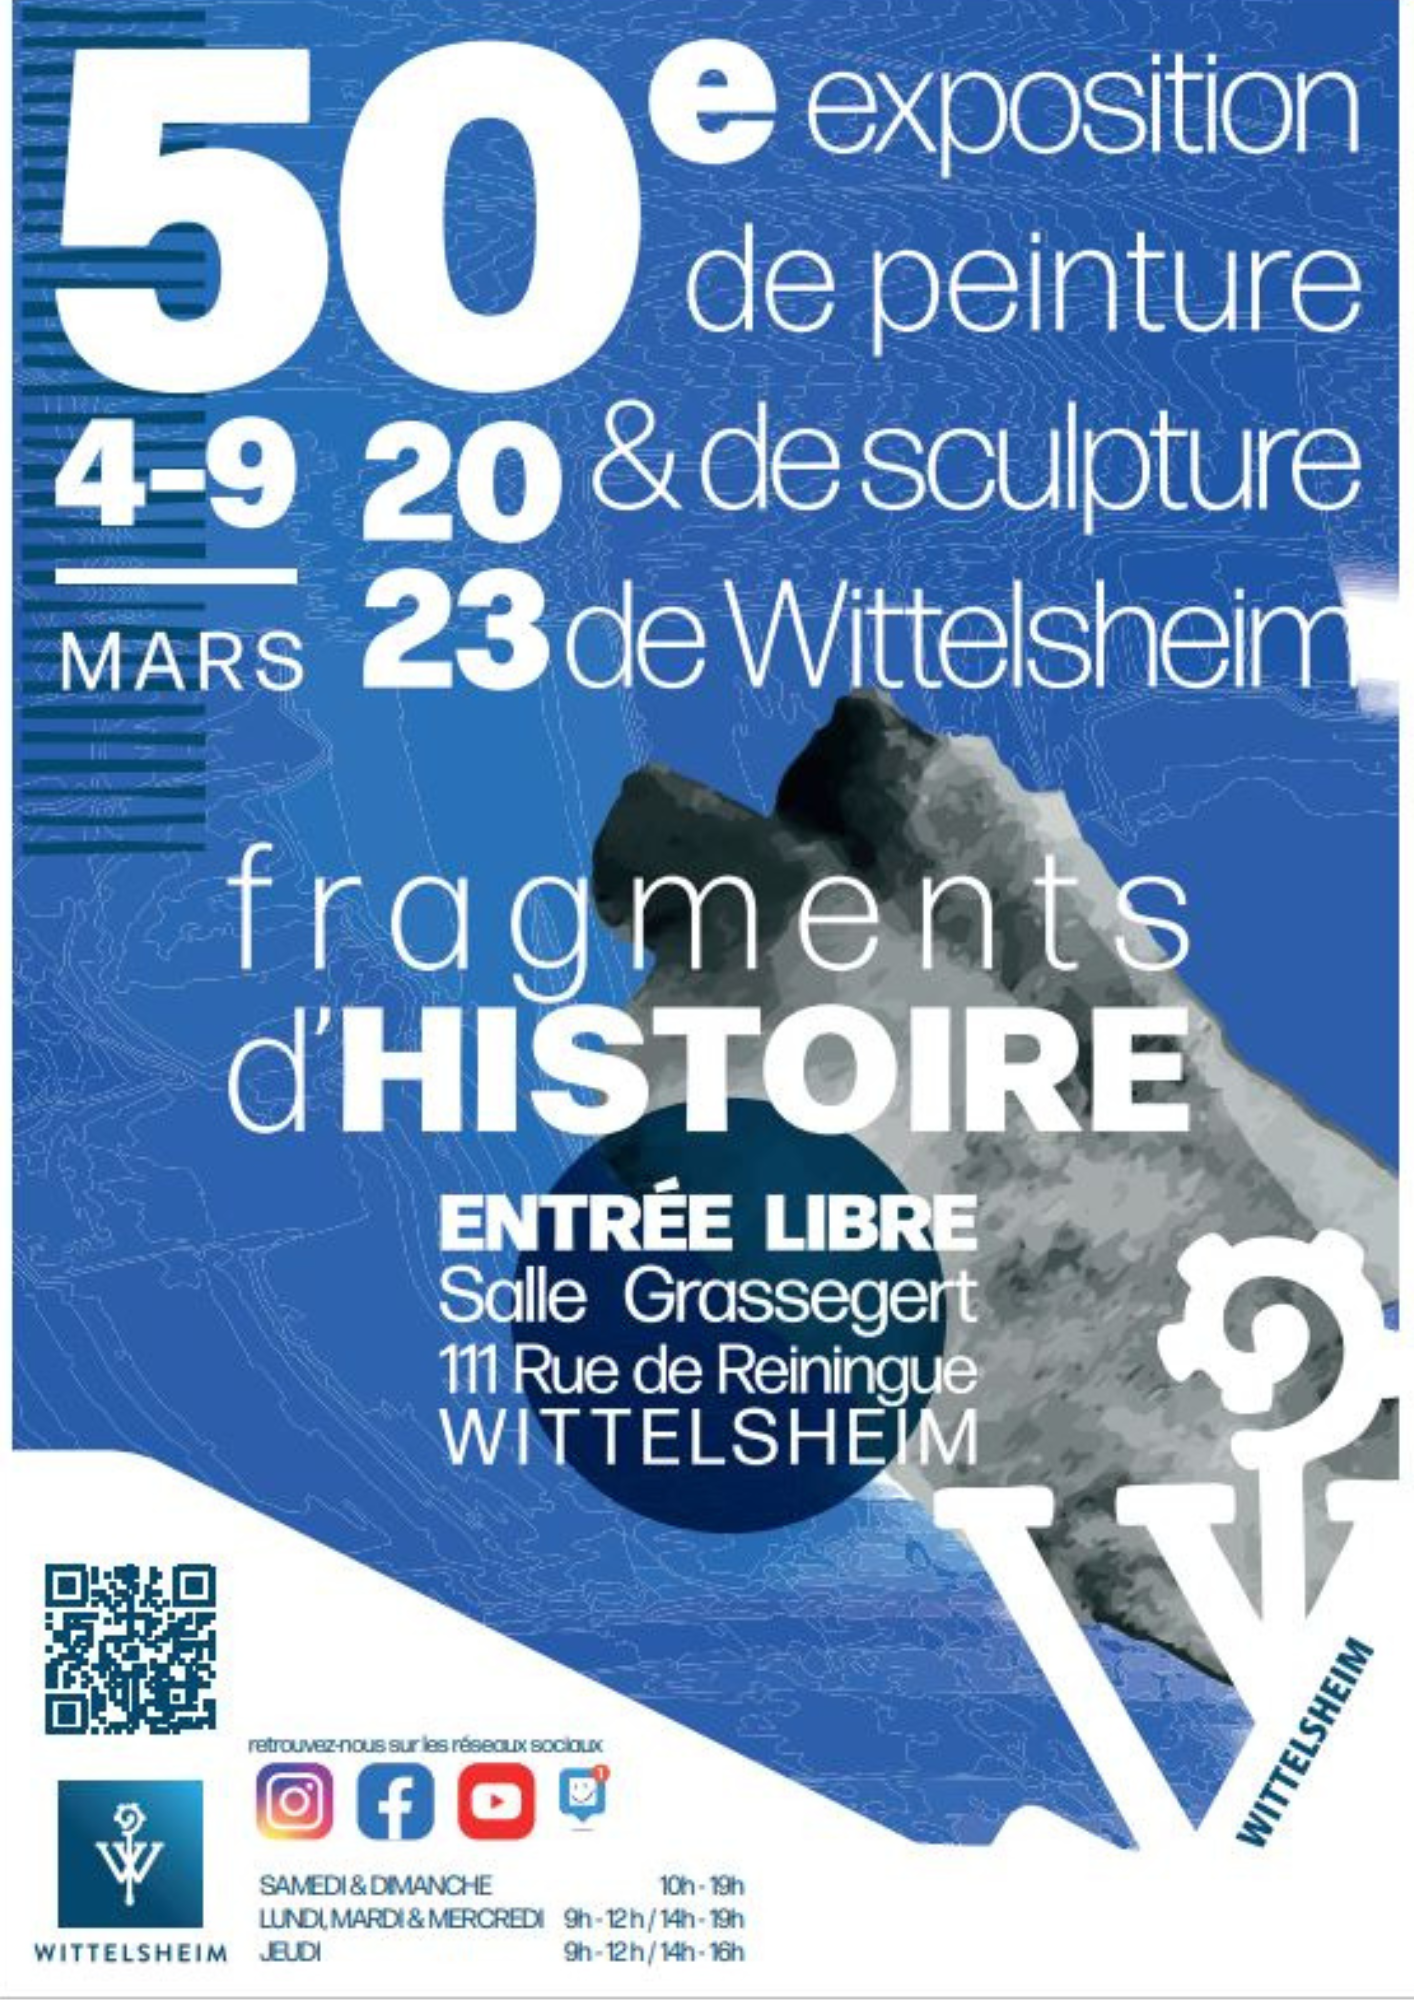 affiche_A3_expo_50e_wittelsheim_charte.pdf.png